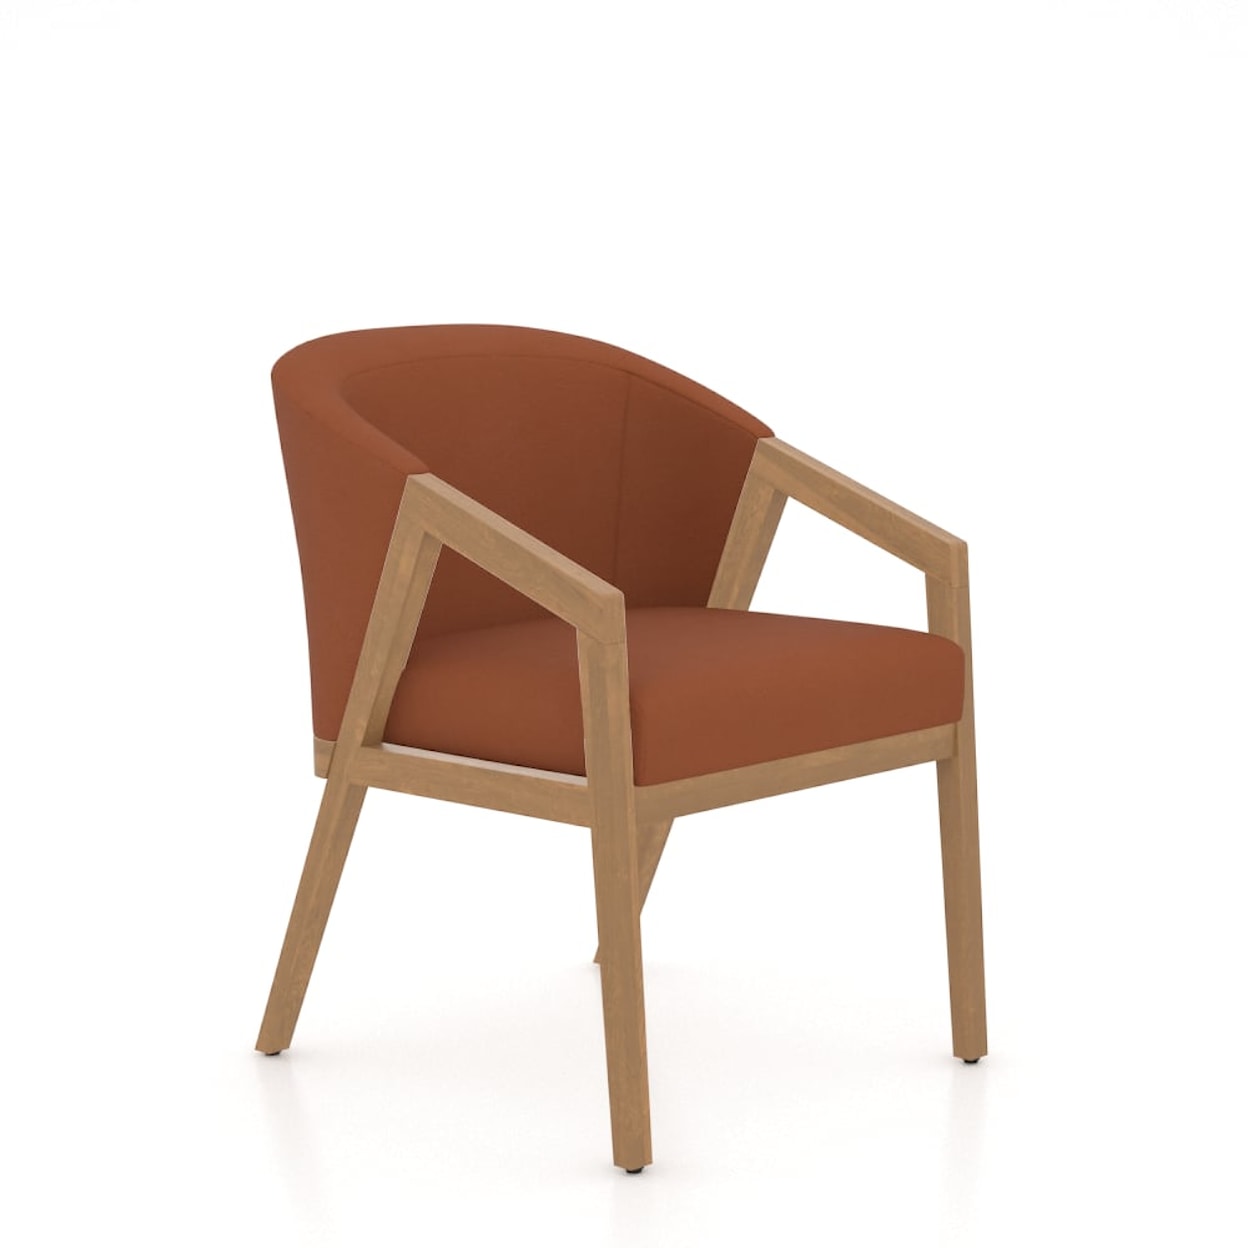 Canadel Modern Upholstered Chair